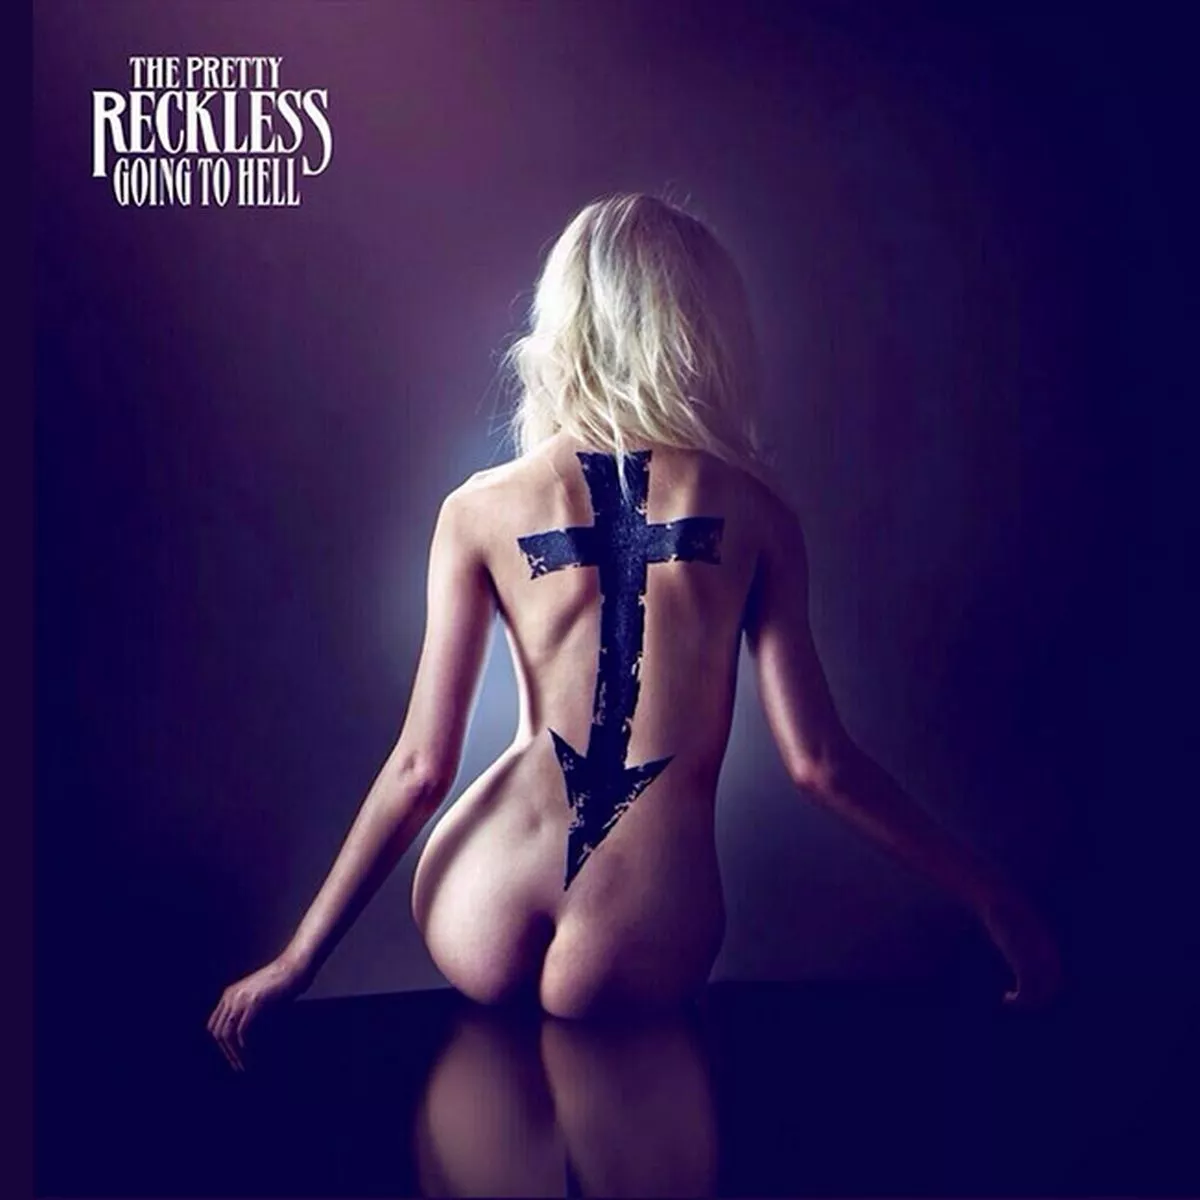 christopher vier recommends Taylor Momsen Topless